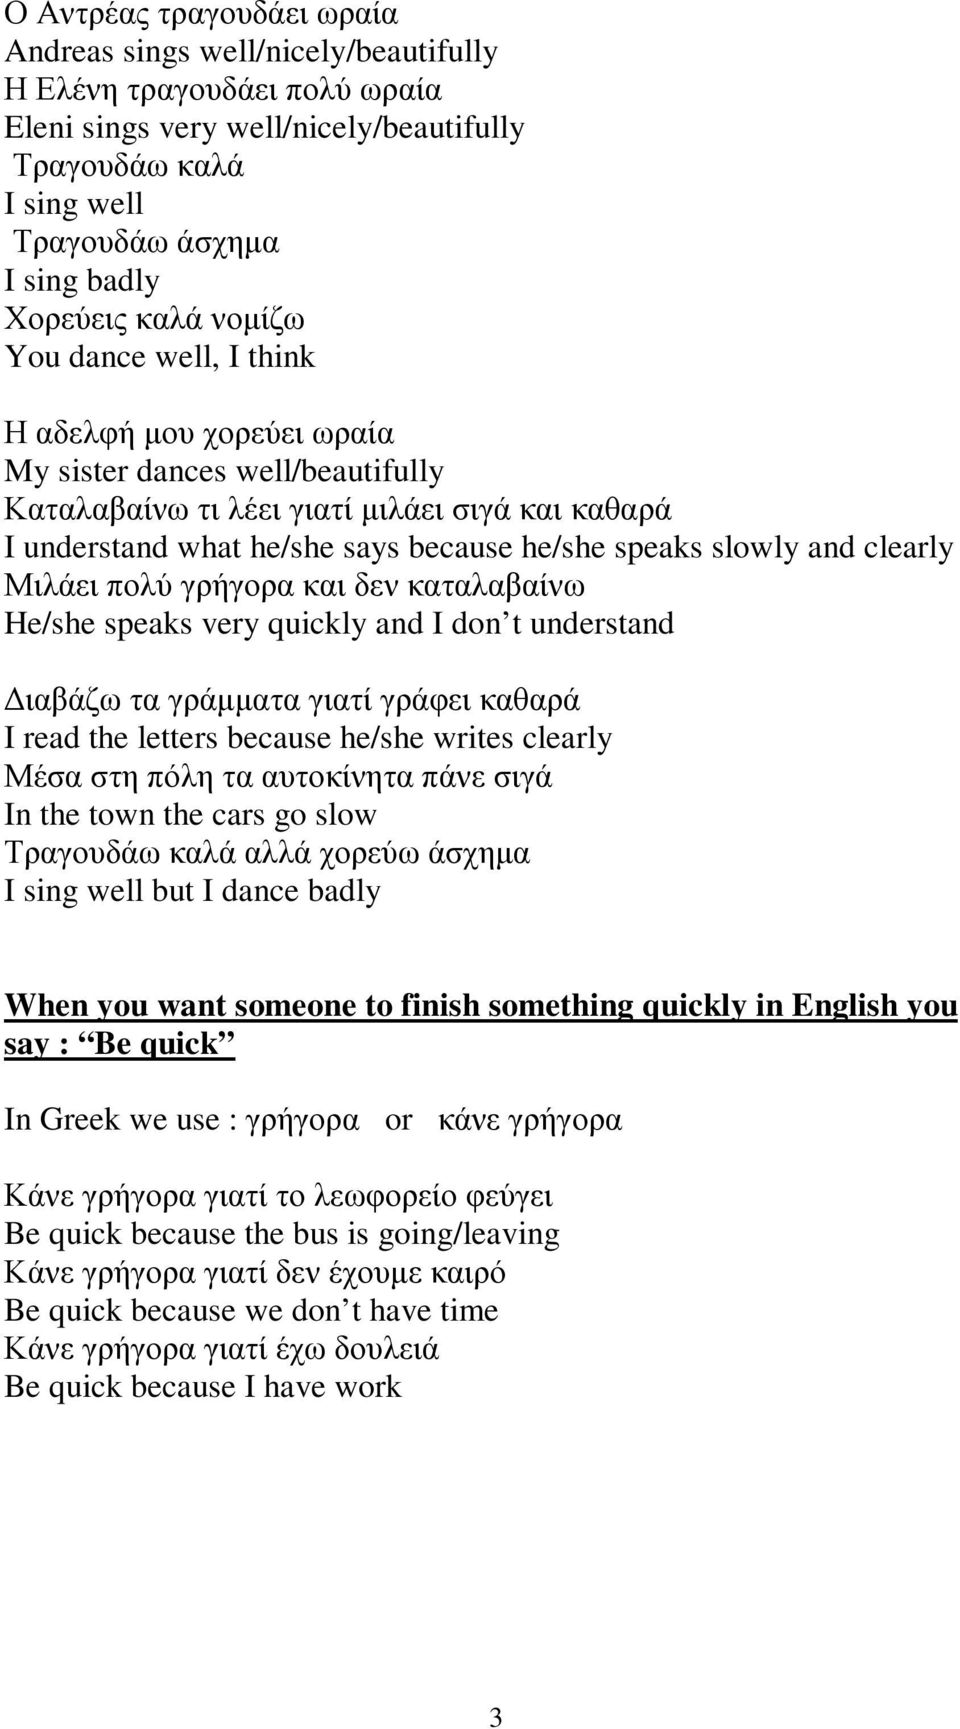 speaks slowly and clearly Μιλάει πολύ γρήγορα και δεν καταλαβαίνω He/she speaks very quickly and I don t understand Διαβάζω τα γράμματα γιατί γράφει καθαρά I read the letters because he/she writes